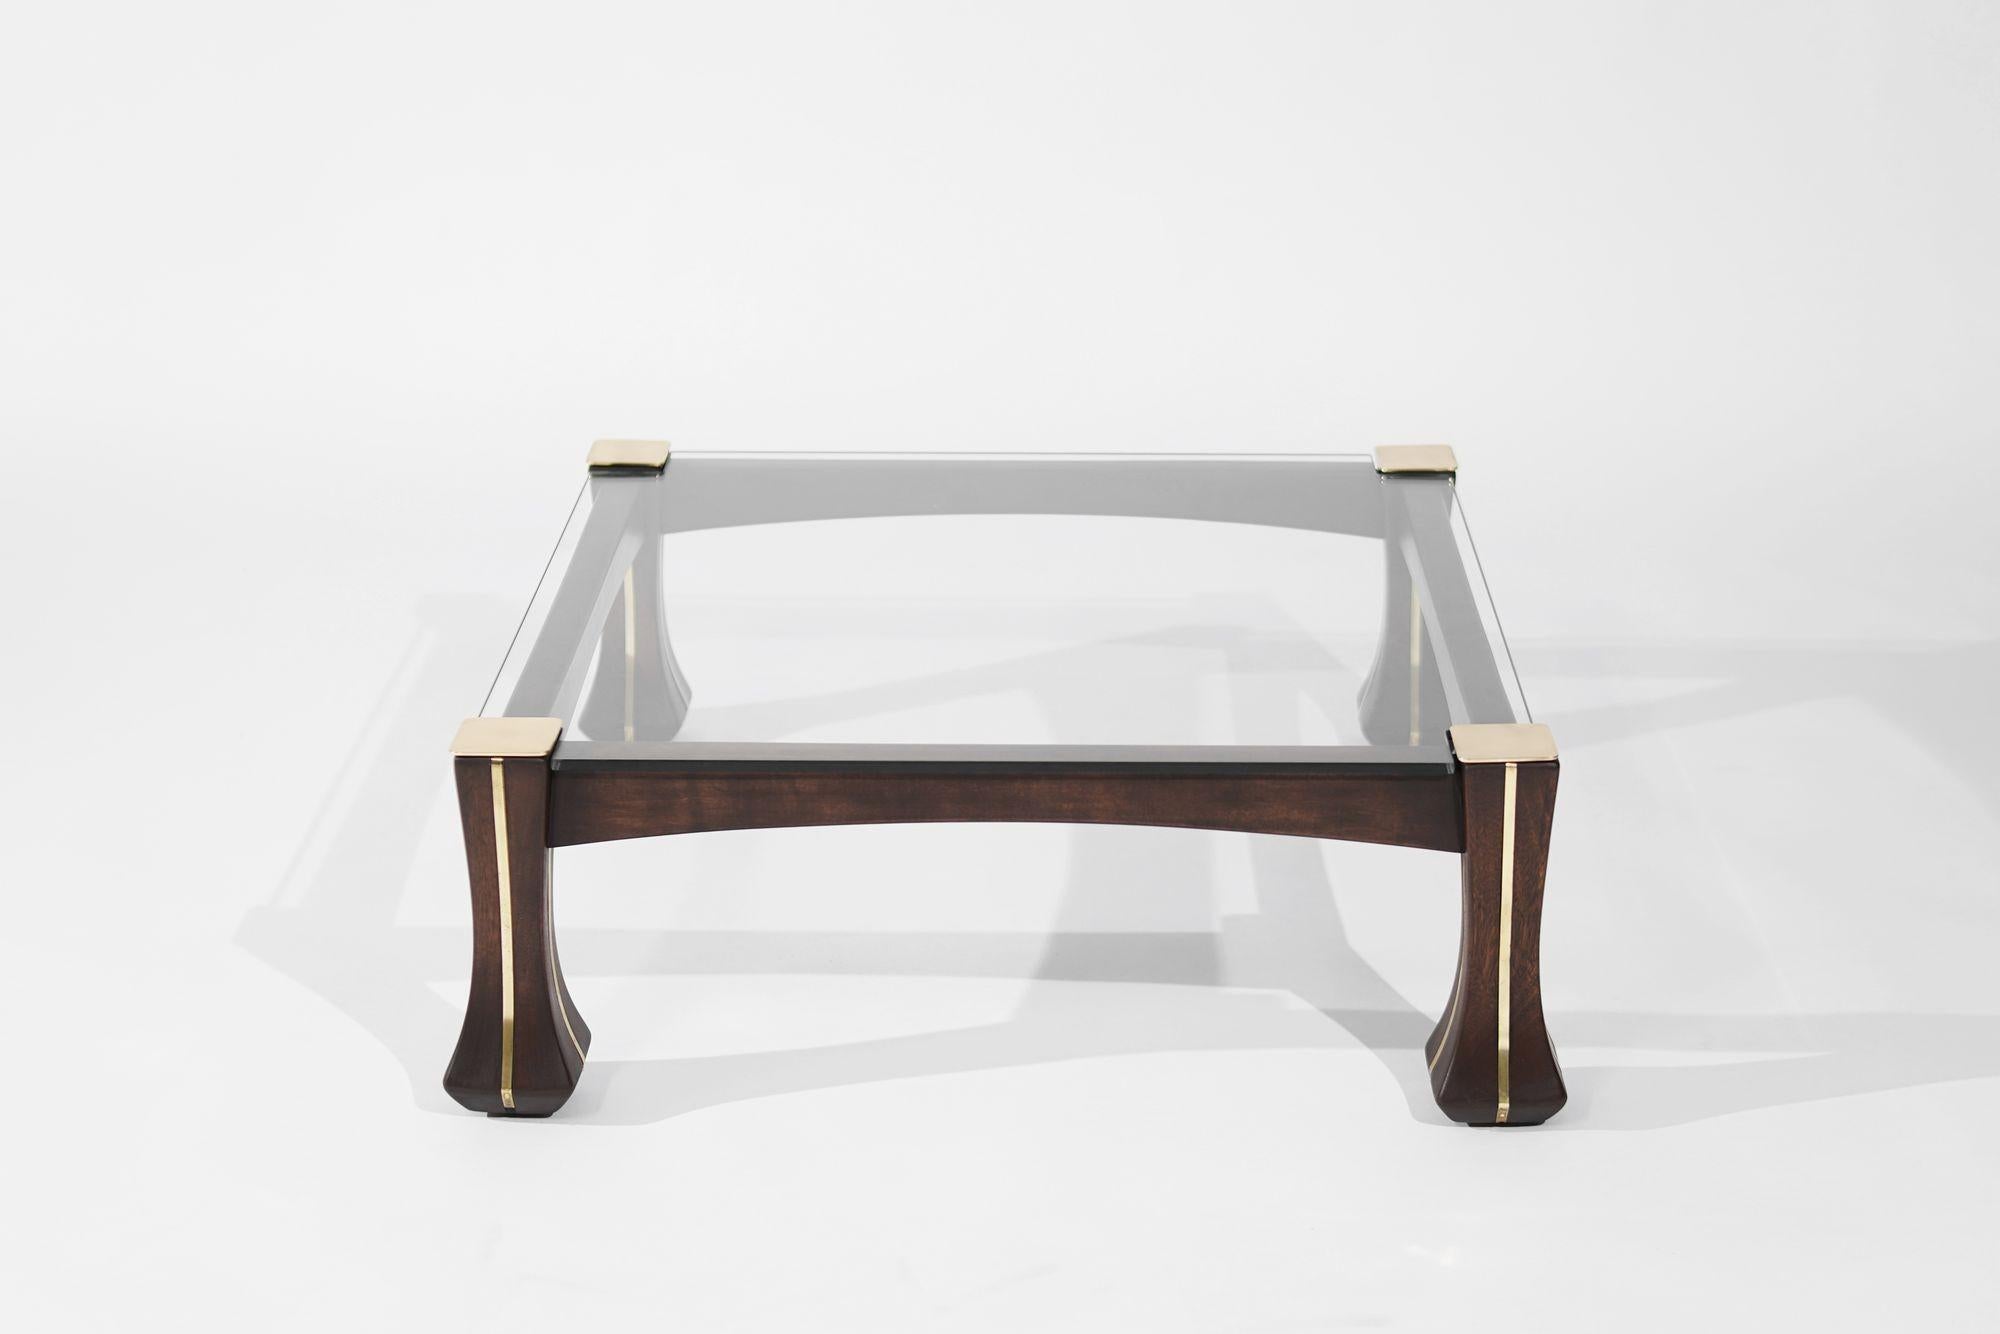 A fully restored vintage coffee table from 1970s Italy, designed by Luciano Frigerio. This elegant piece features mahogany, inlaid brass accents, and a glass top. With its blend of materials and meticulous craftsmanship, it adds a touch of Italian